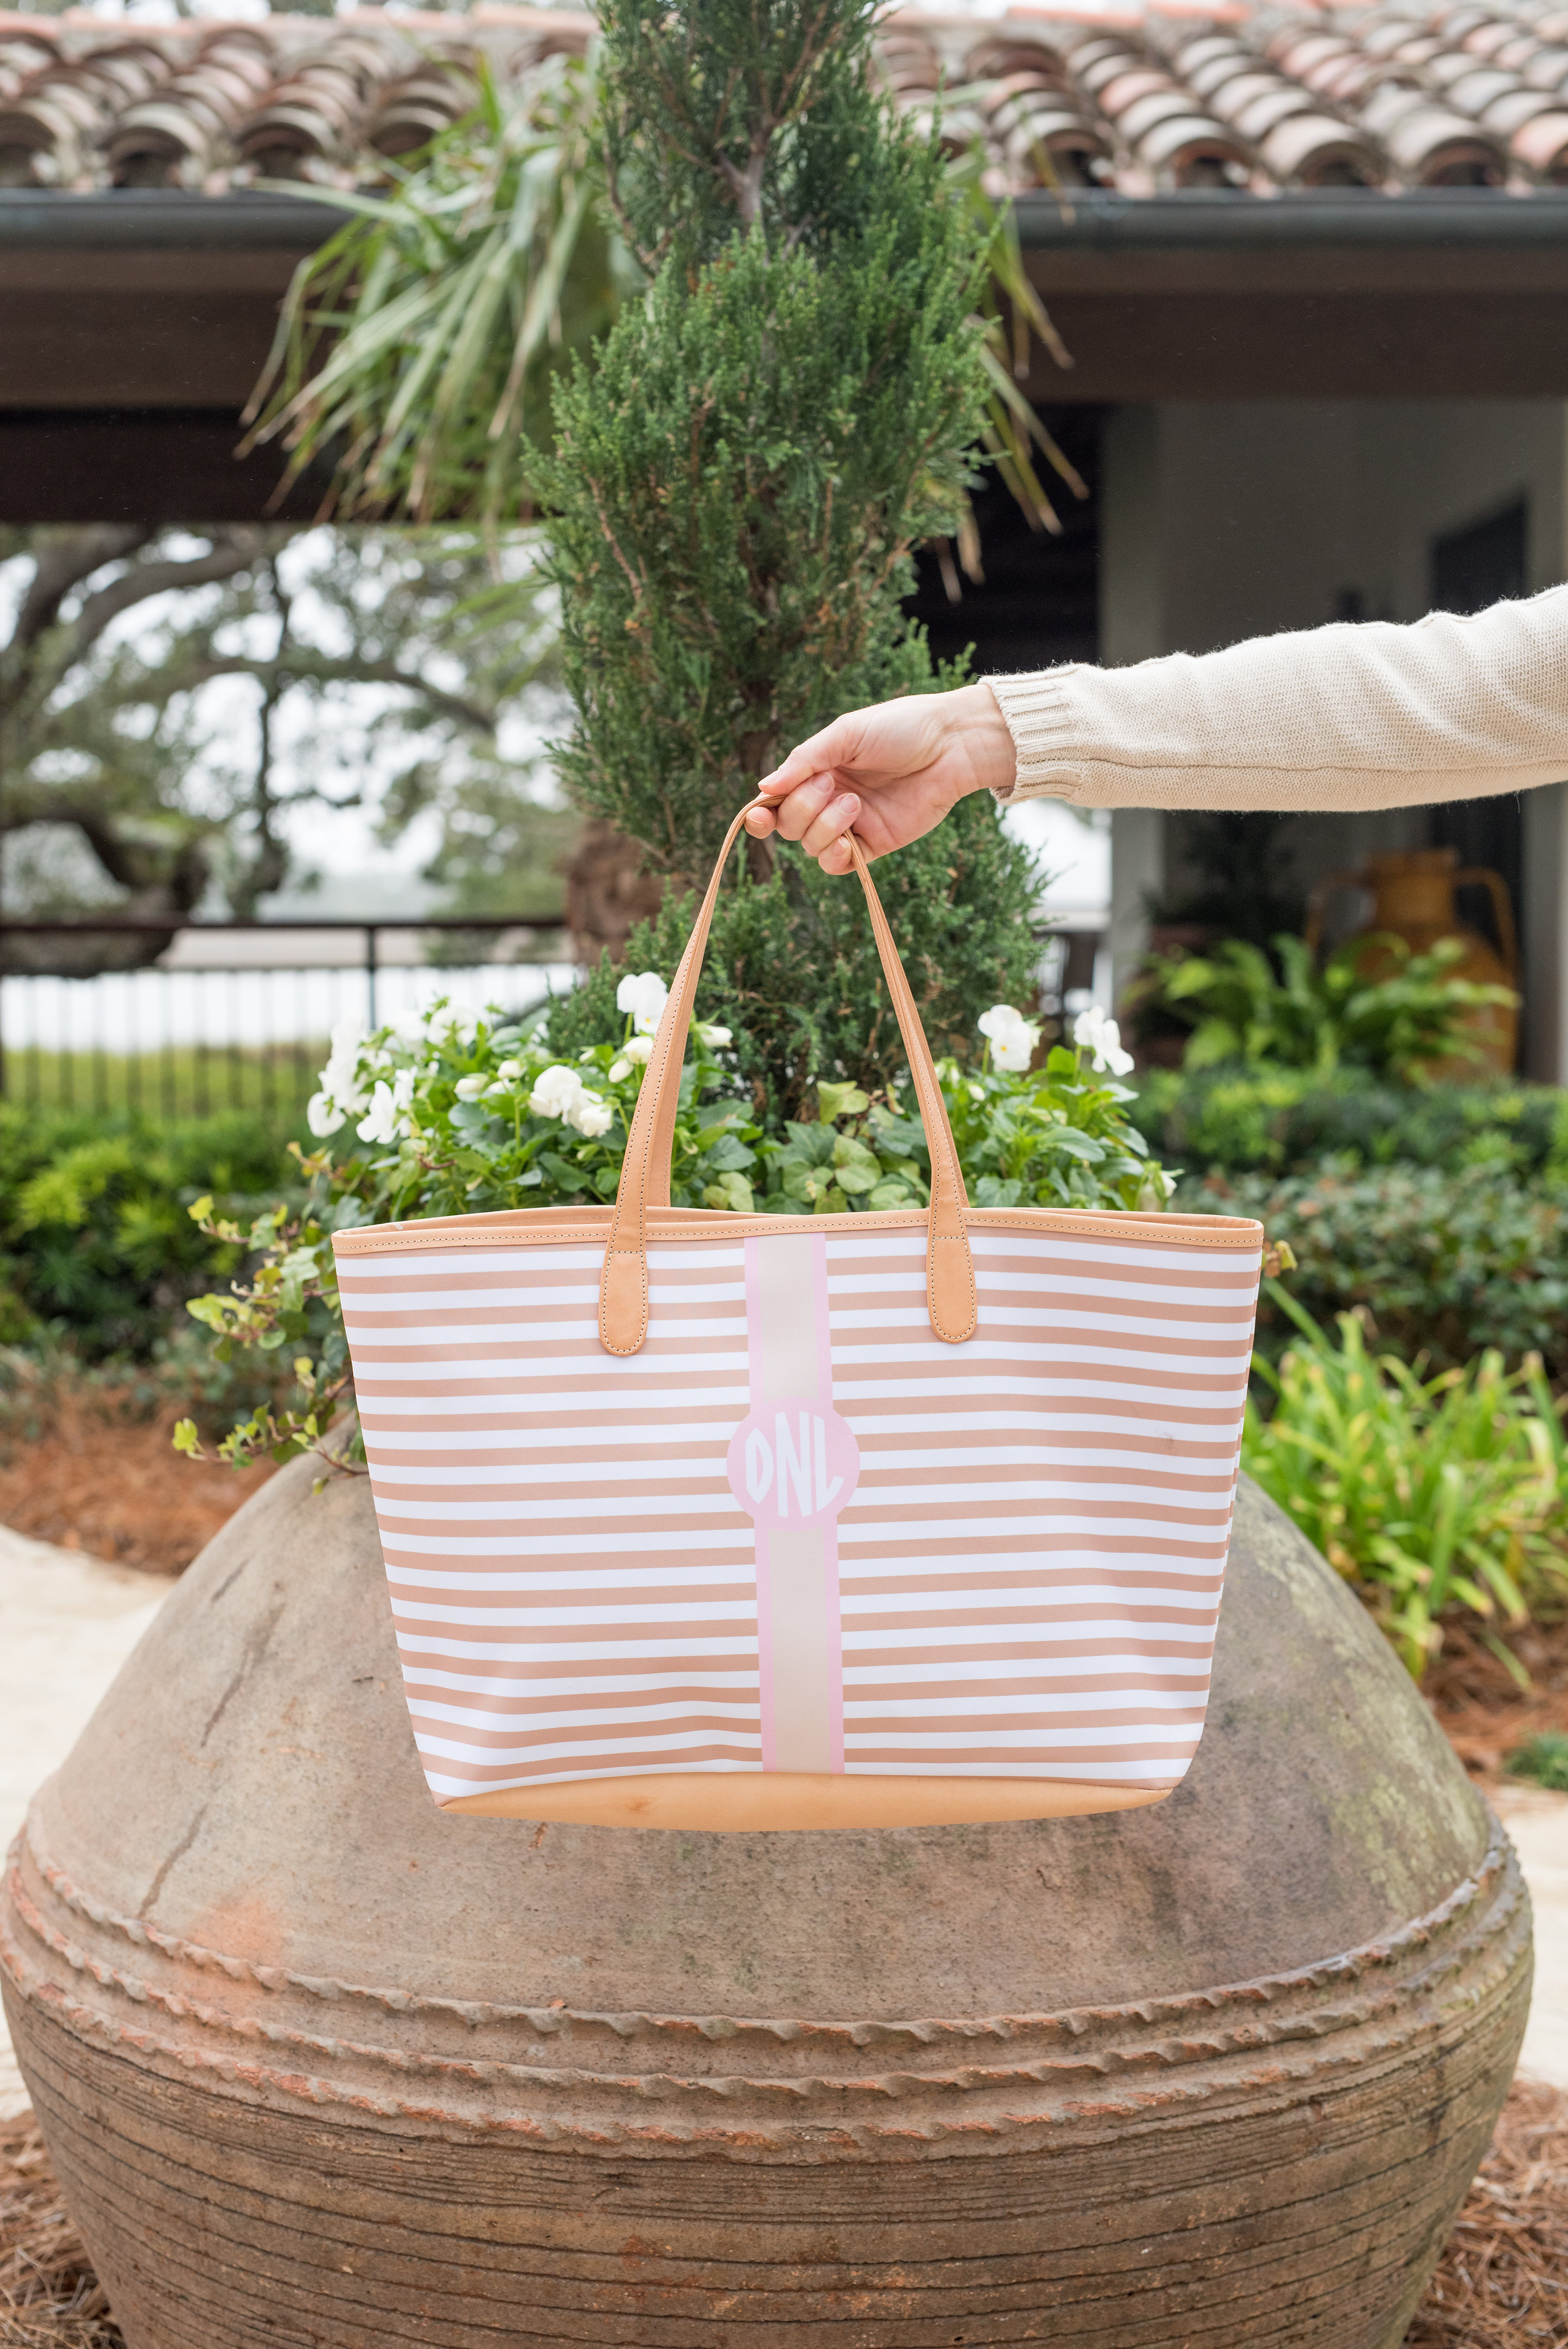 Fashion: Barrington Gifts with Palm Beach Lately